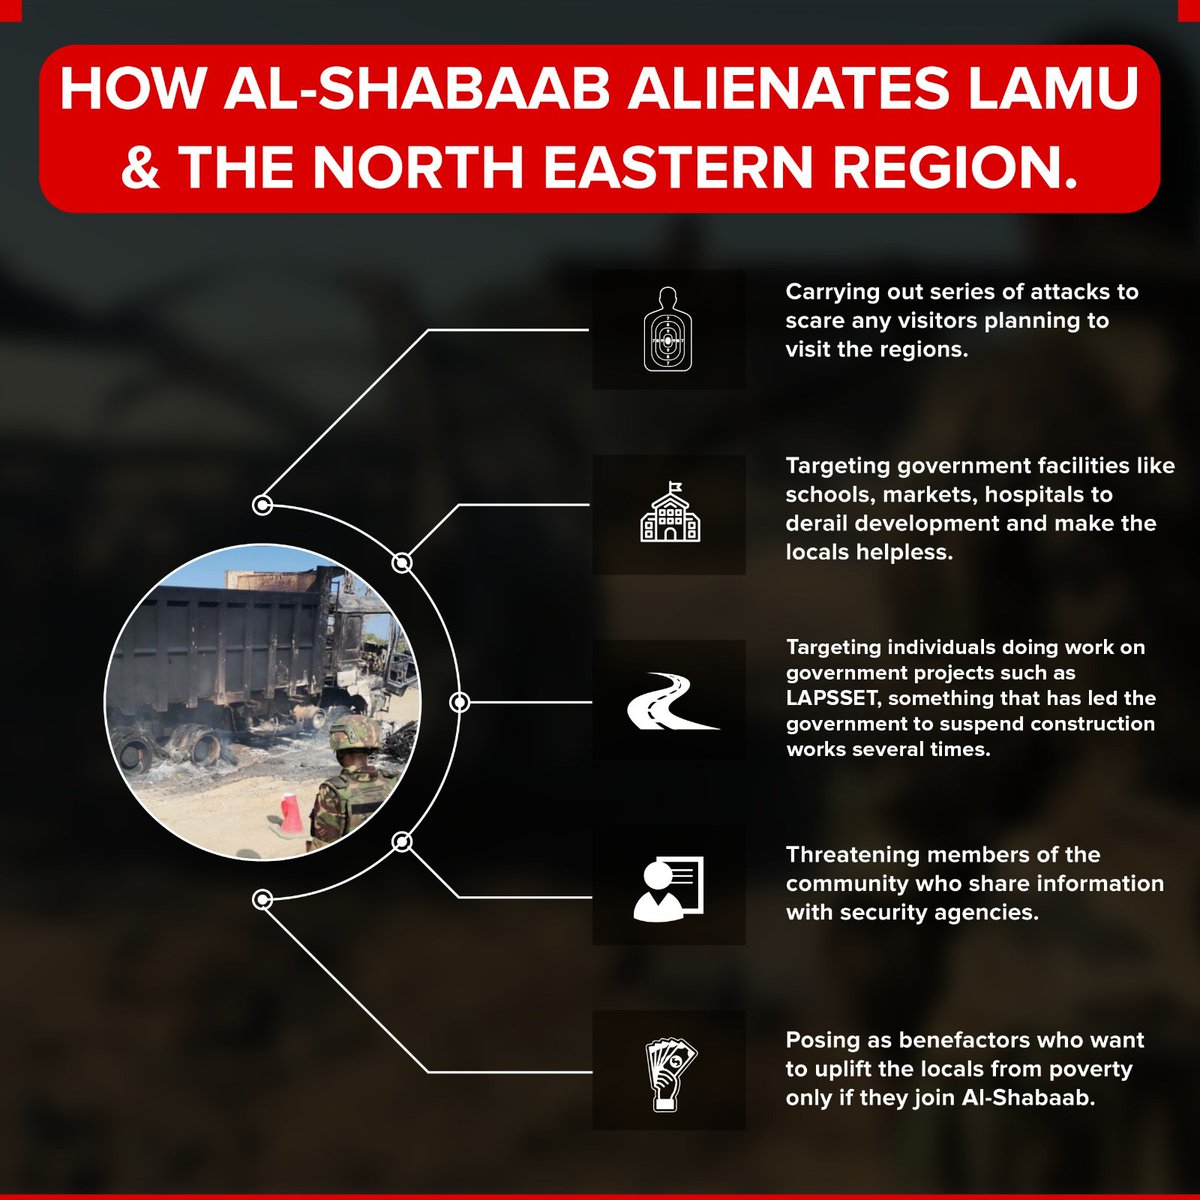 #Alshabaab is an enemy of progress which is desperately attempting to marginalise Northeastern Region and #Lamu. The people of these regions need to work with government and other stakeholders to fight Al-Shabaab to jealously guard development projects for the areas to prosper.